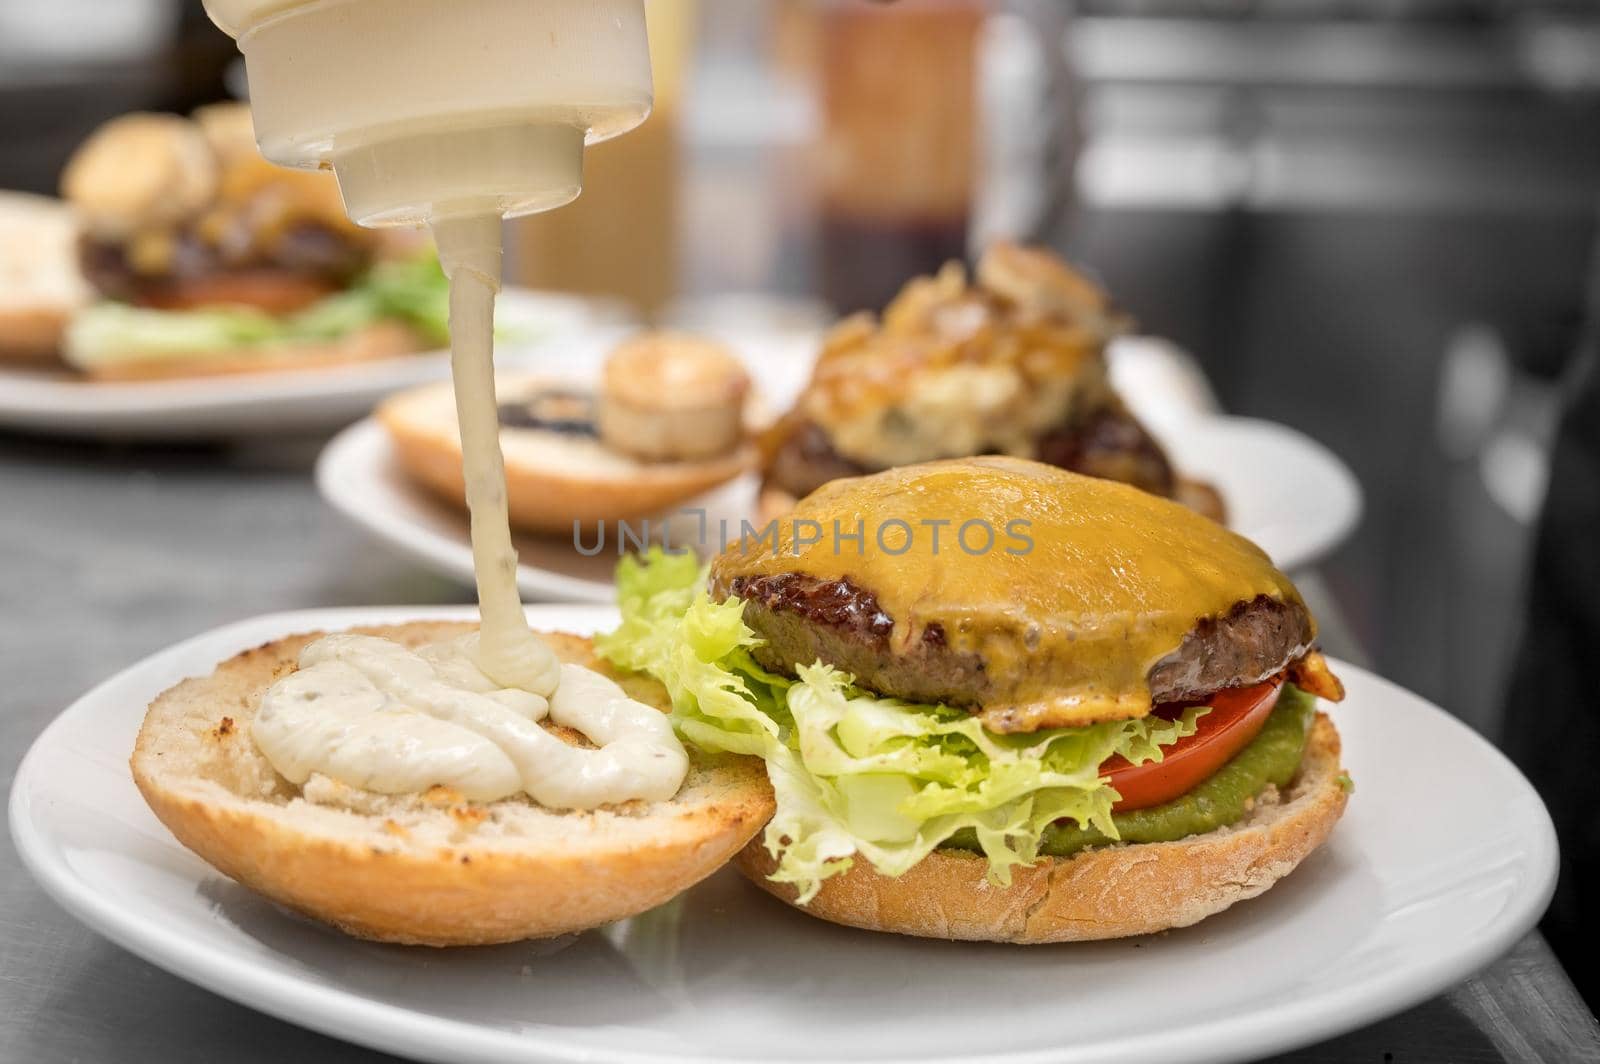 Chef cooking burger,close-up, making sandwich, fast food concept, recipe of preparing homemade hamburger with vegetables. by HERRAEZ